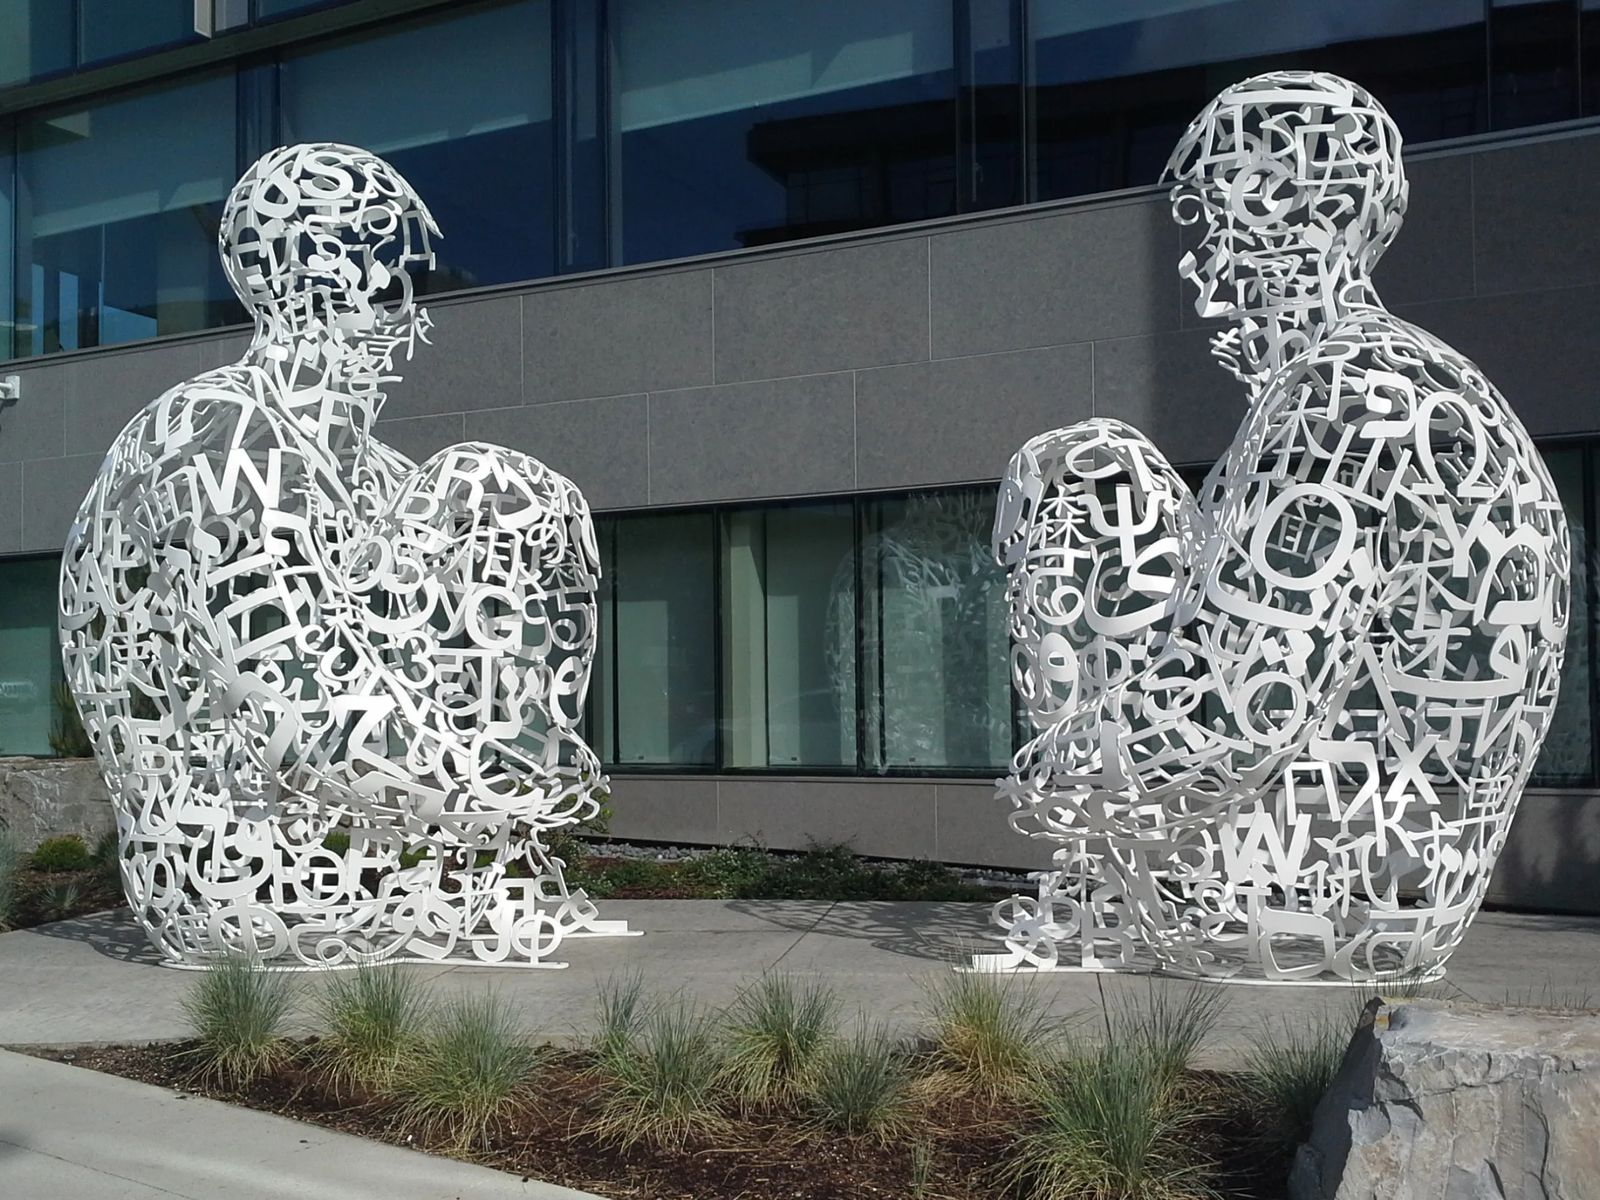 Photo of two 12 foot tall, white, stainless steel sculptures sitting face-to-face, in Seattle, Washington